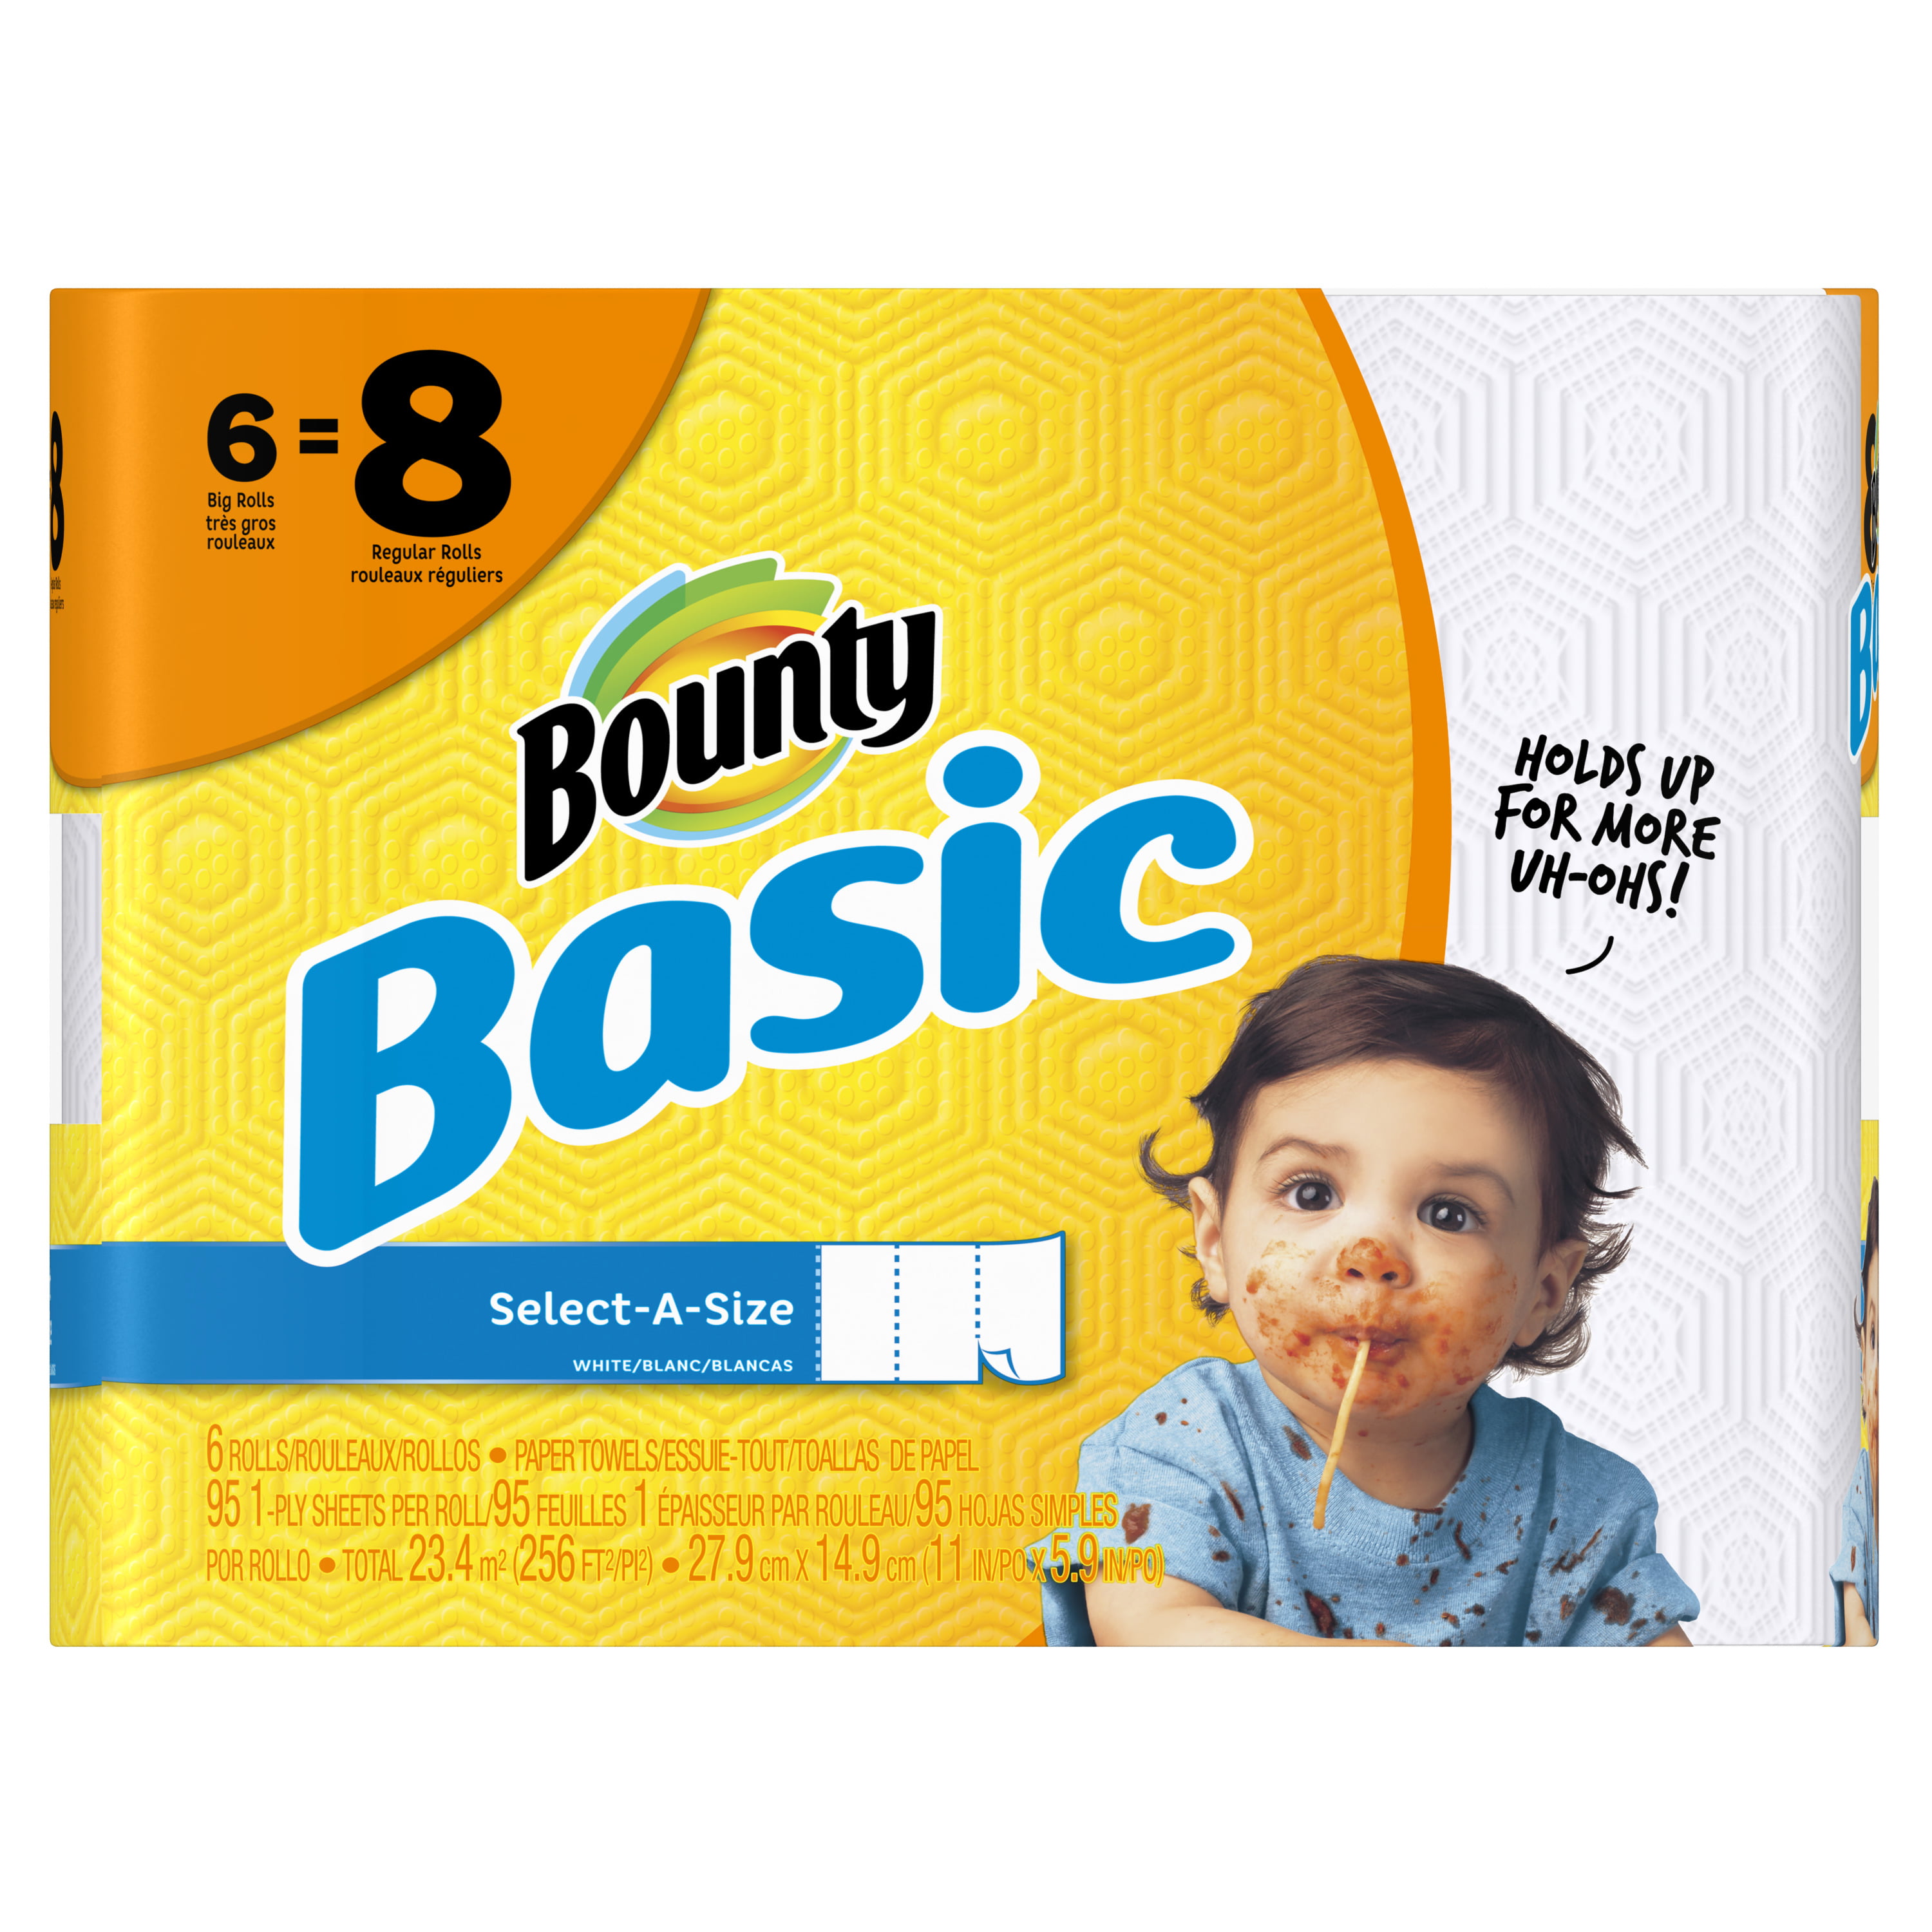 Bounty Select-A-Size Paper Towels, White, 6 Triple Rolls free shipping